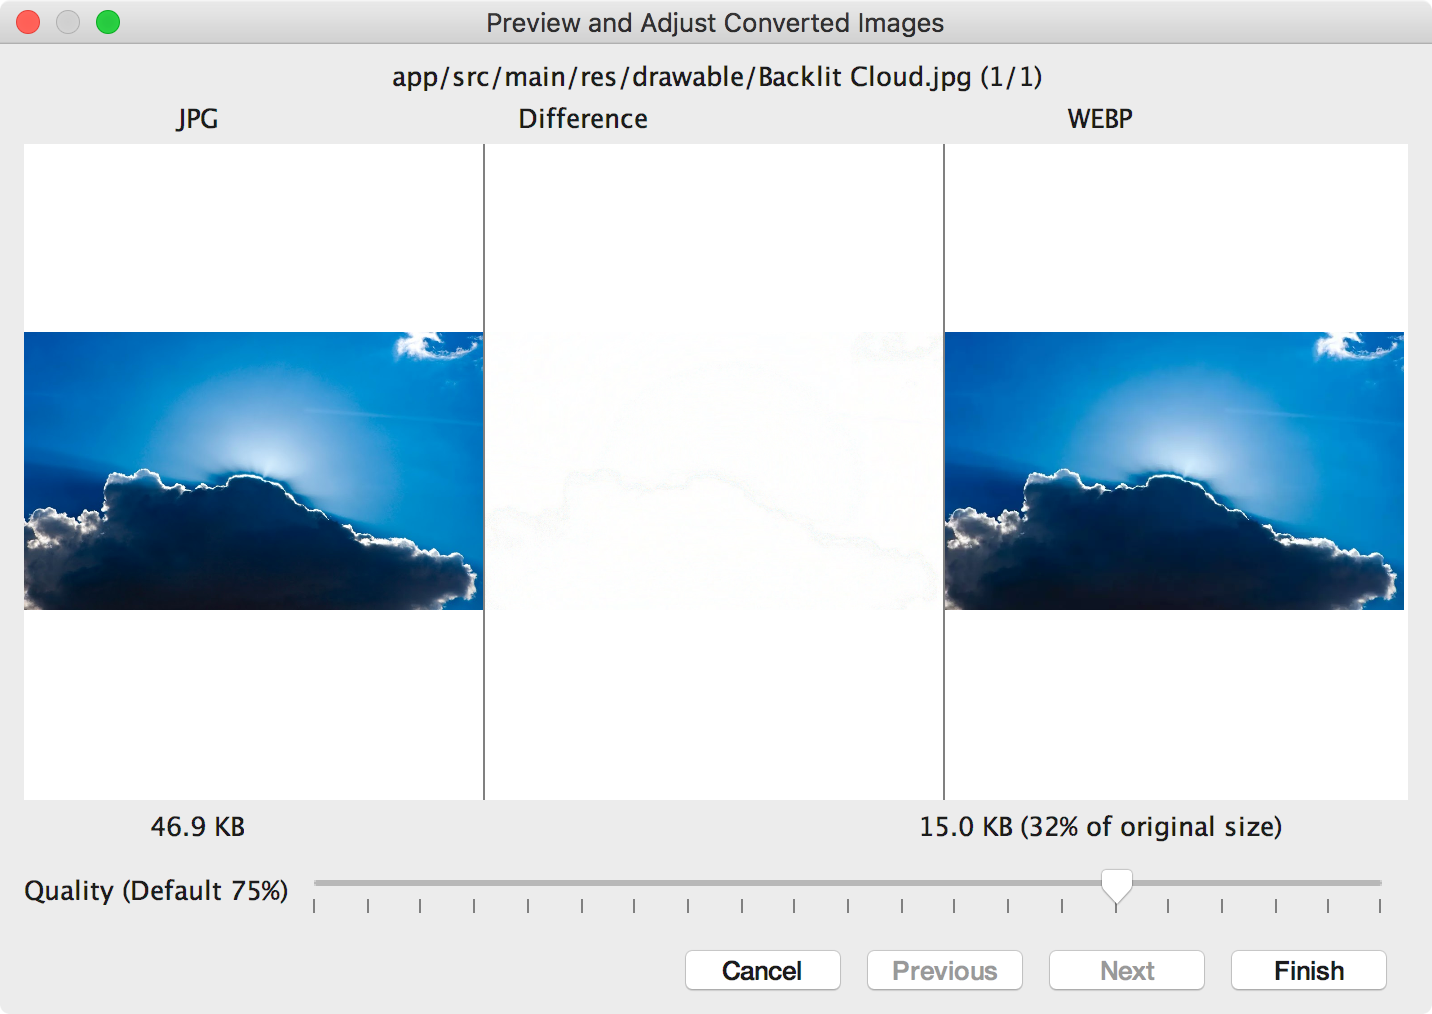 Converting a JPG to WebP format at 75% quality